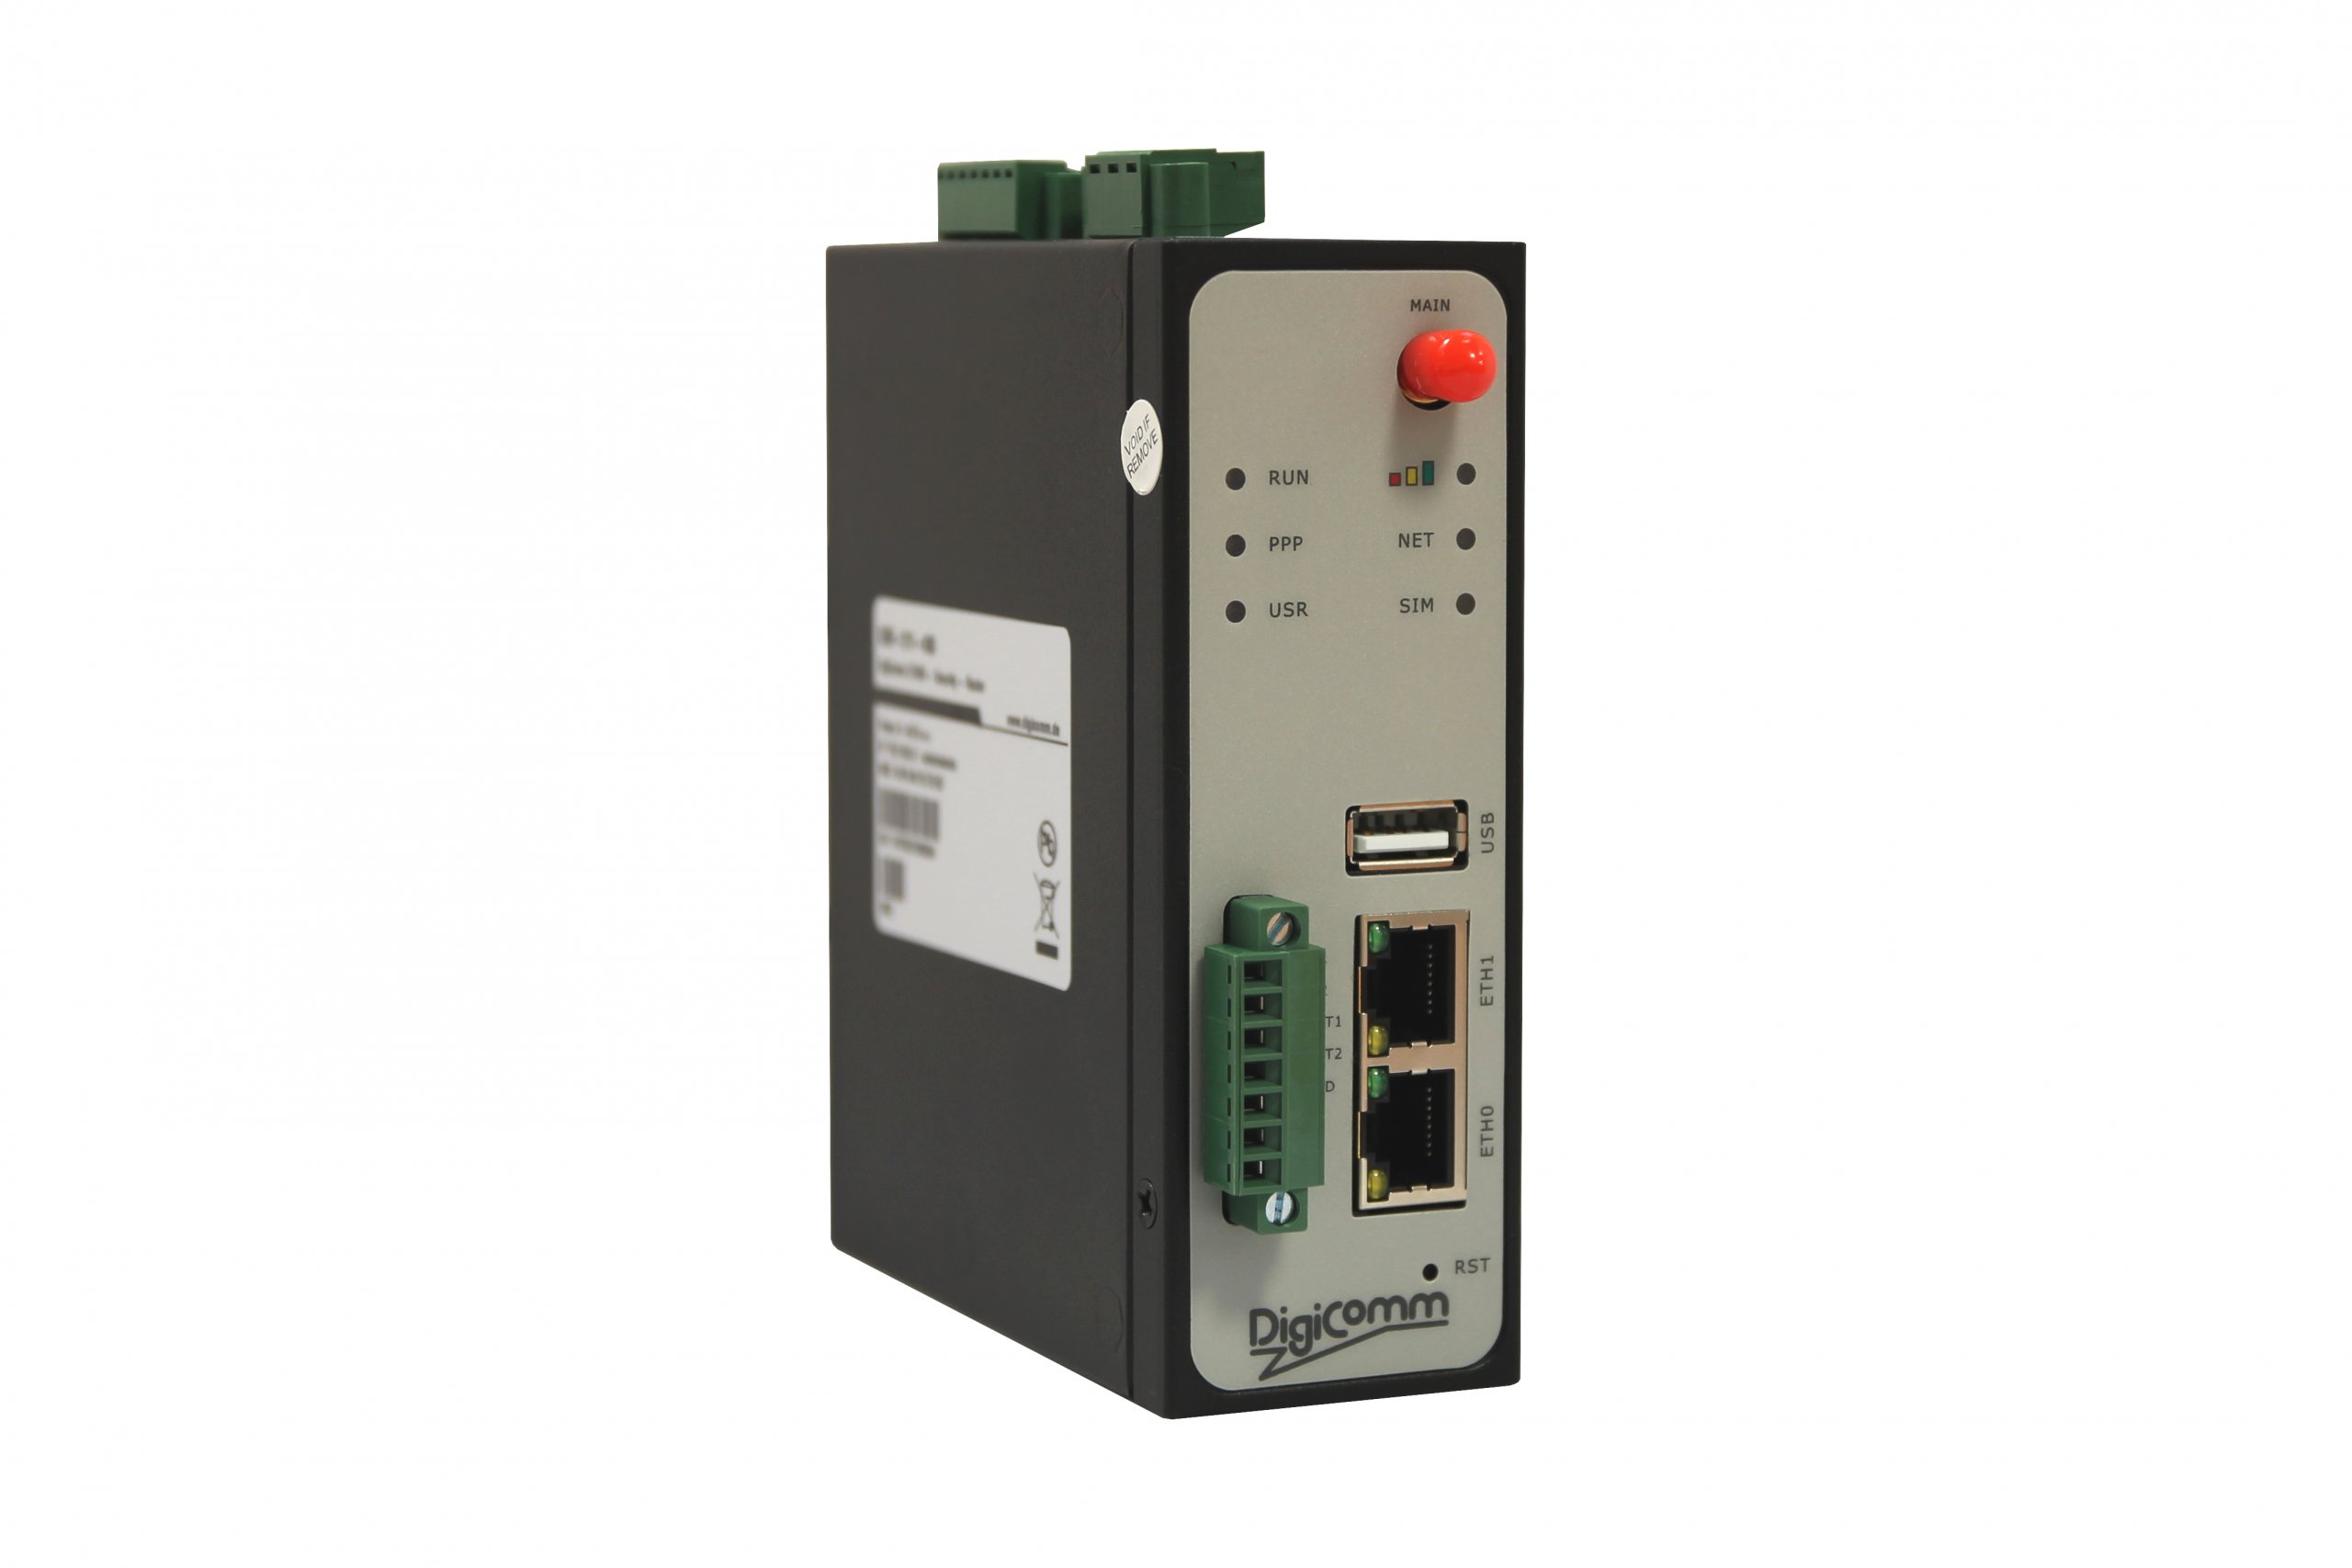 DSR-211-450 compact LTE-450 / LTE-M / NB-IoT